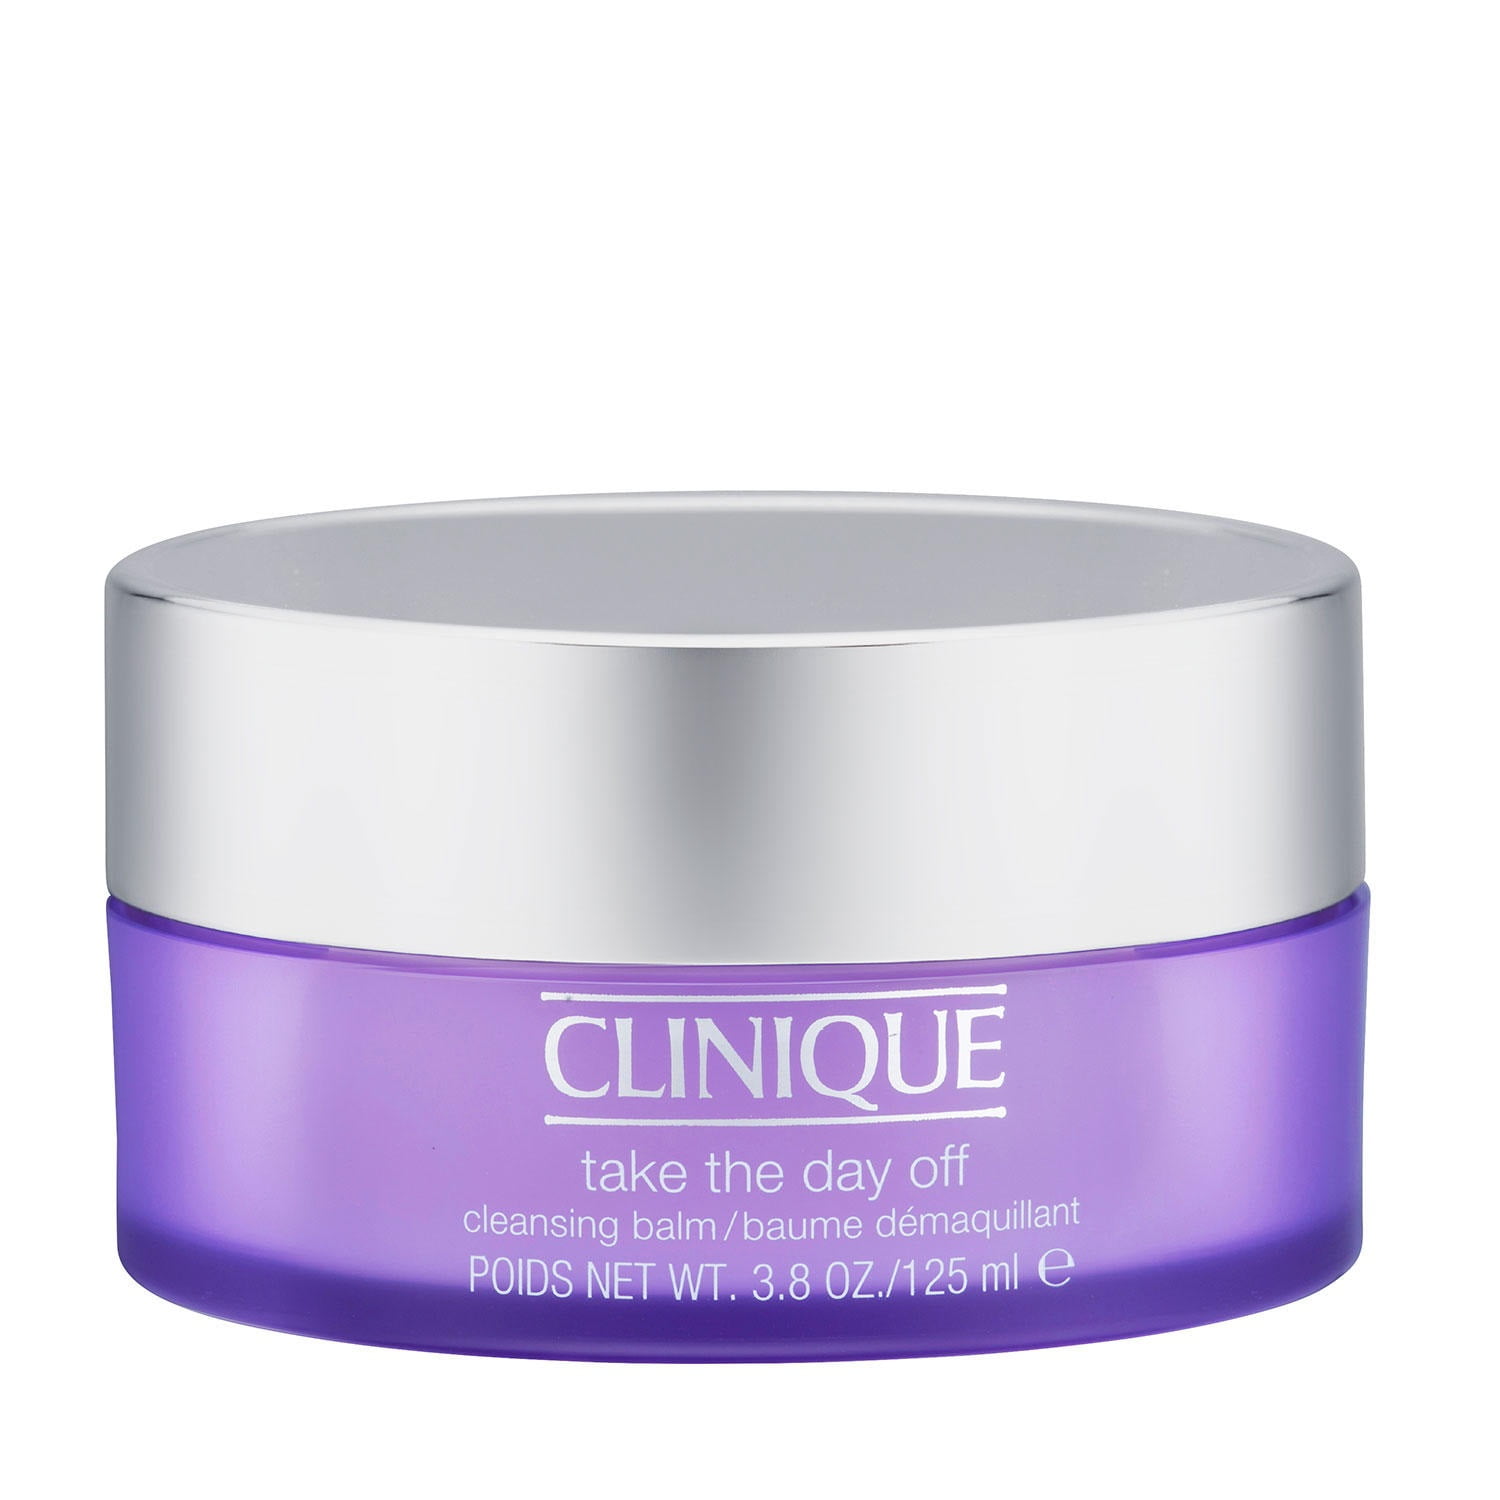 Cleansing Day The Clinique Take 3.8 Balm, oz Off